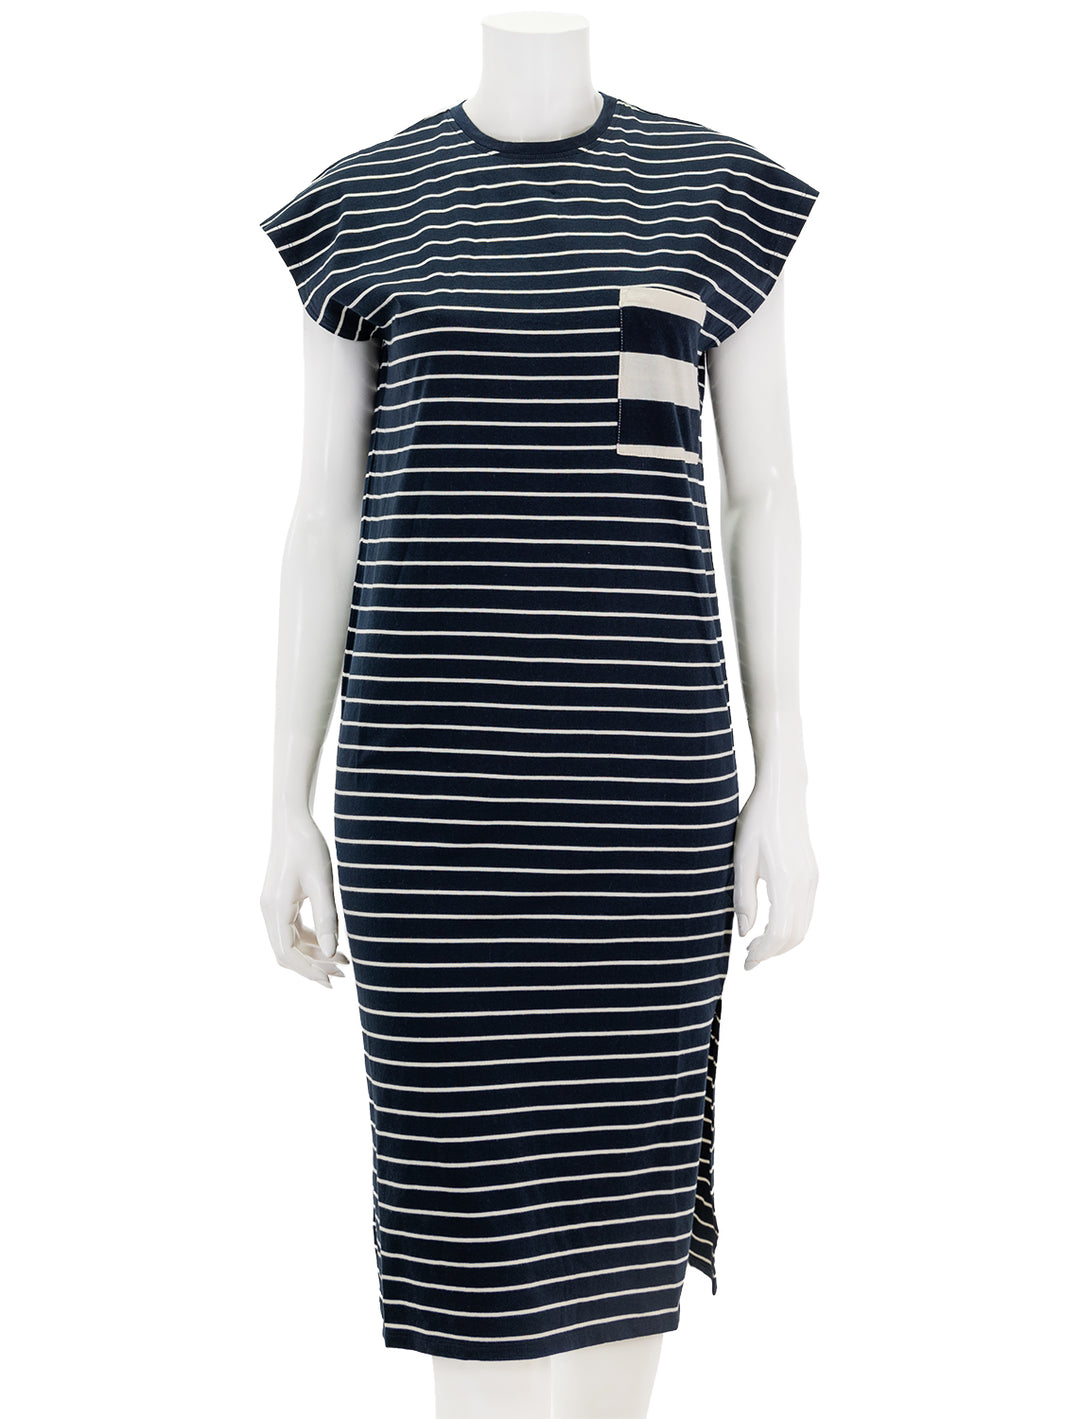 Front view of KULE's the honor dress in navy and cream stripe.